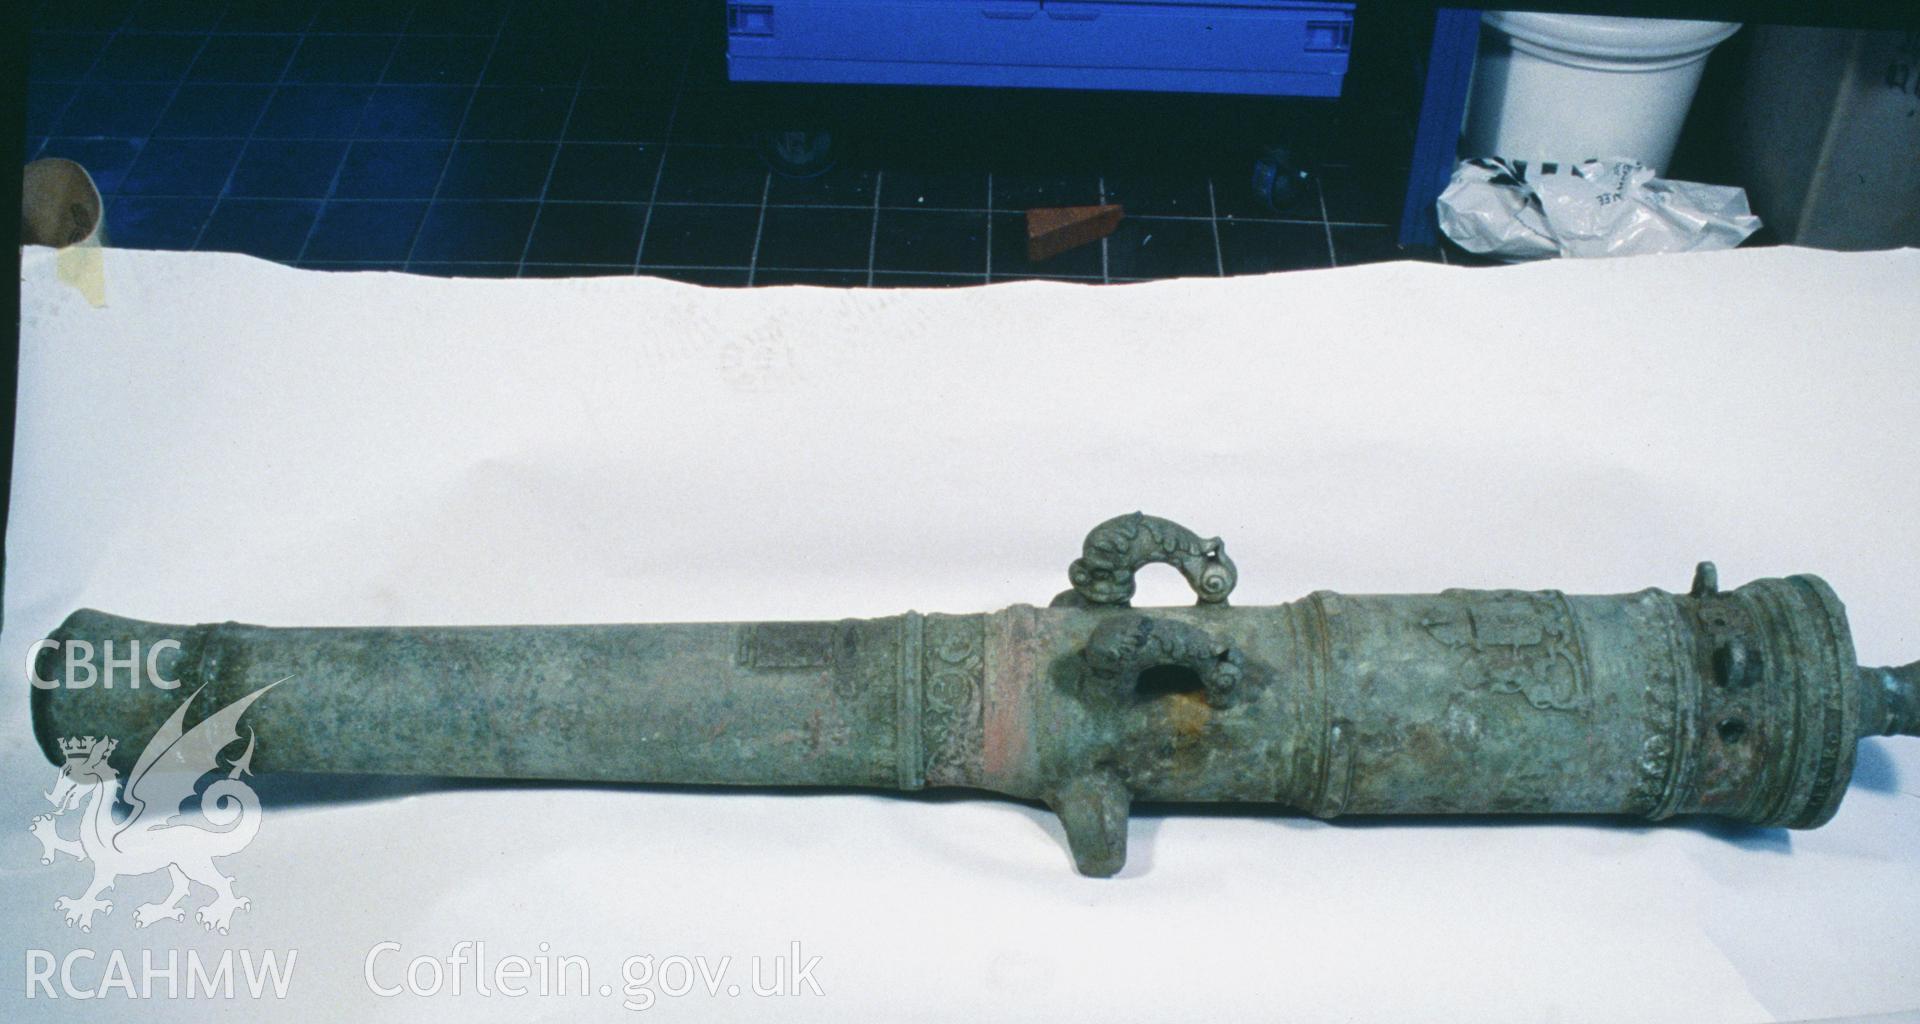 Colour slide showing well preserved gun find, with dolphin lifters, from a survey of the Mary designated shipwreck, courtesy of National Museums, Liverpool (Merseyside Maritime Museum)